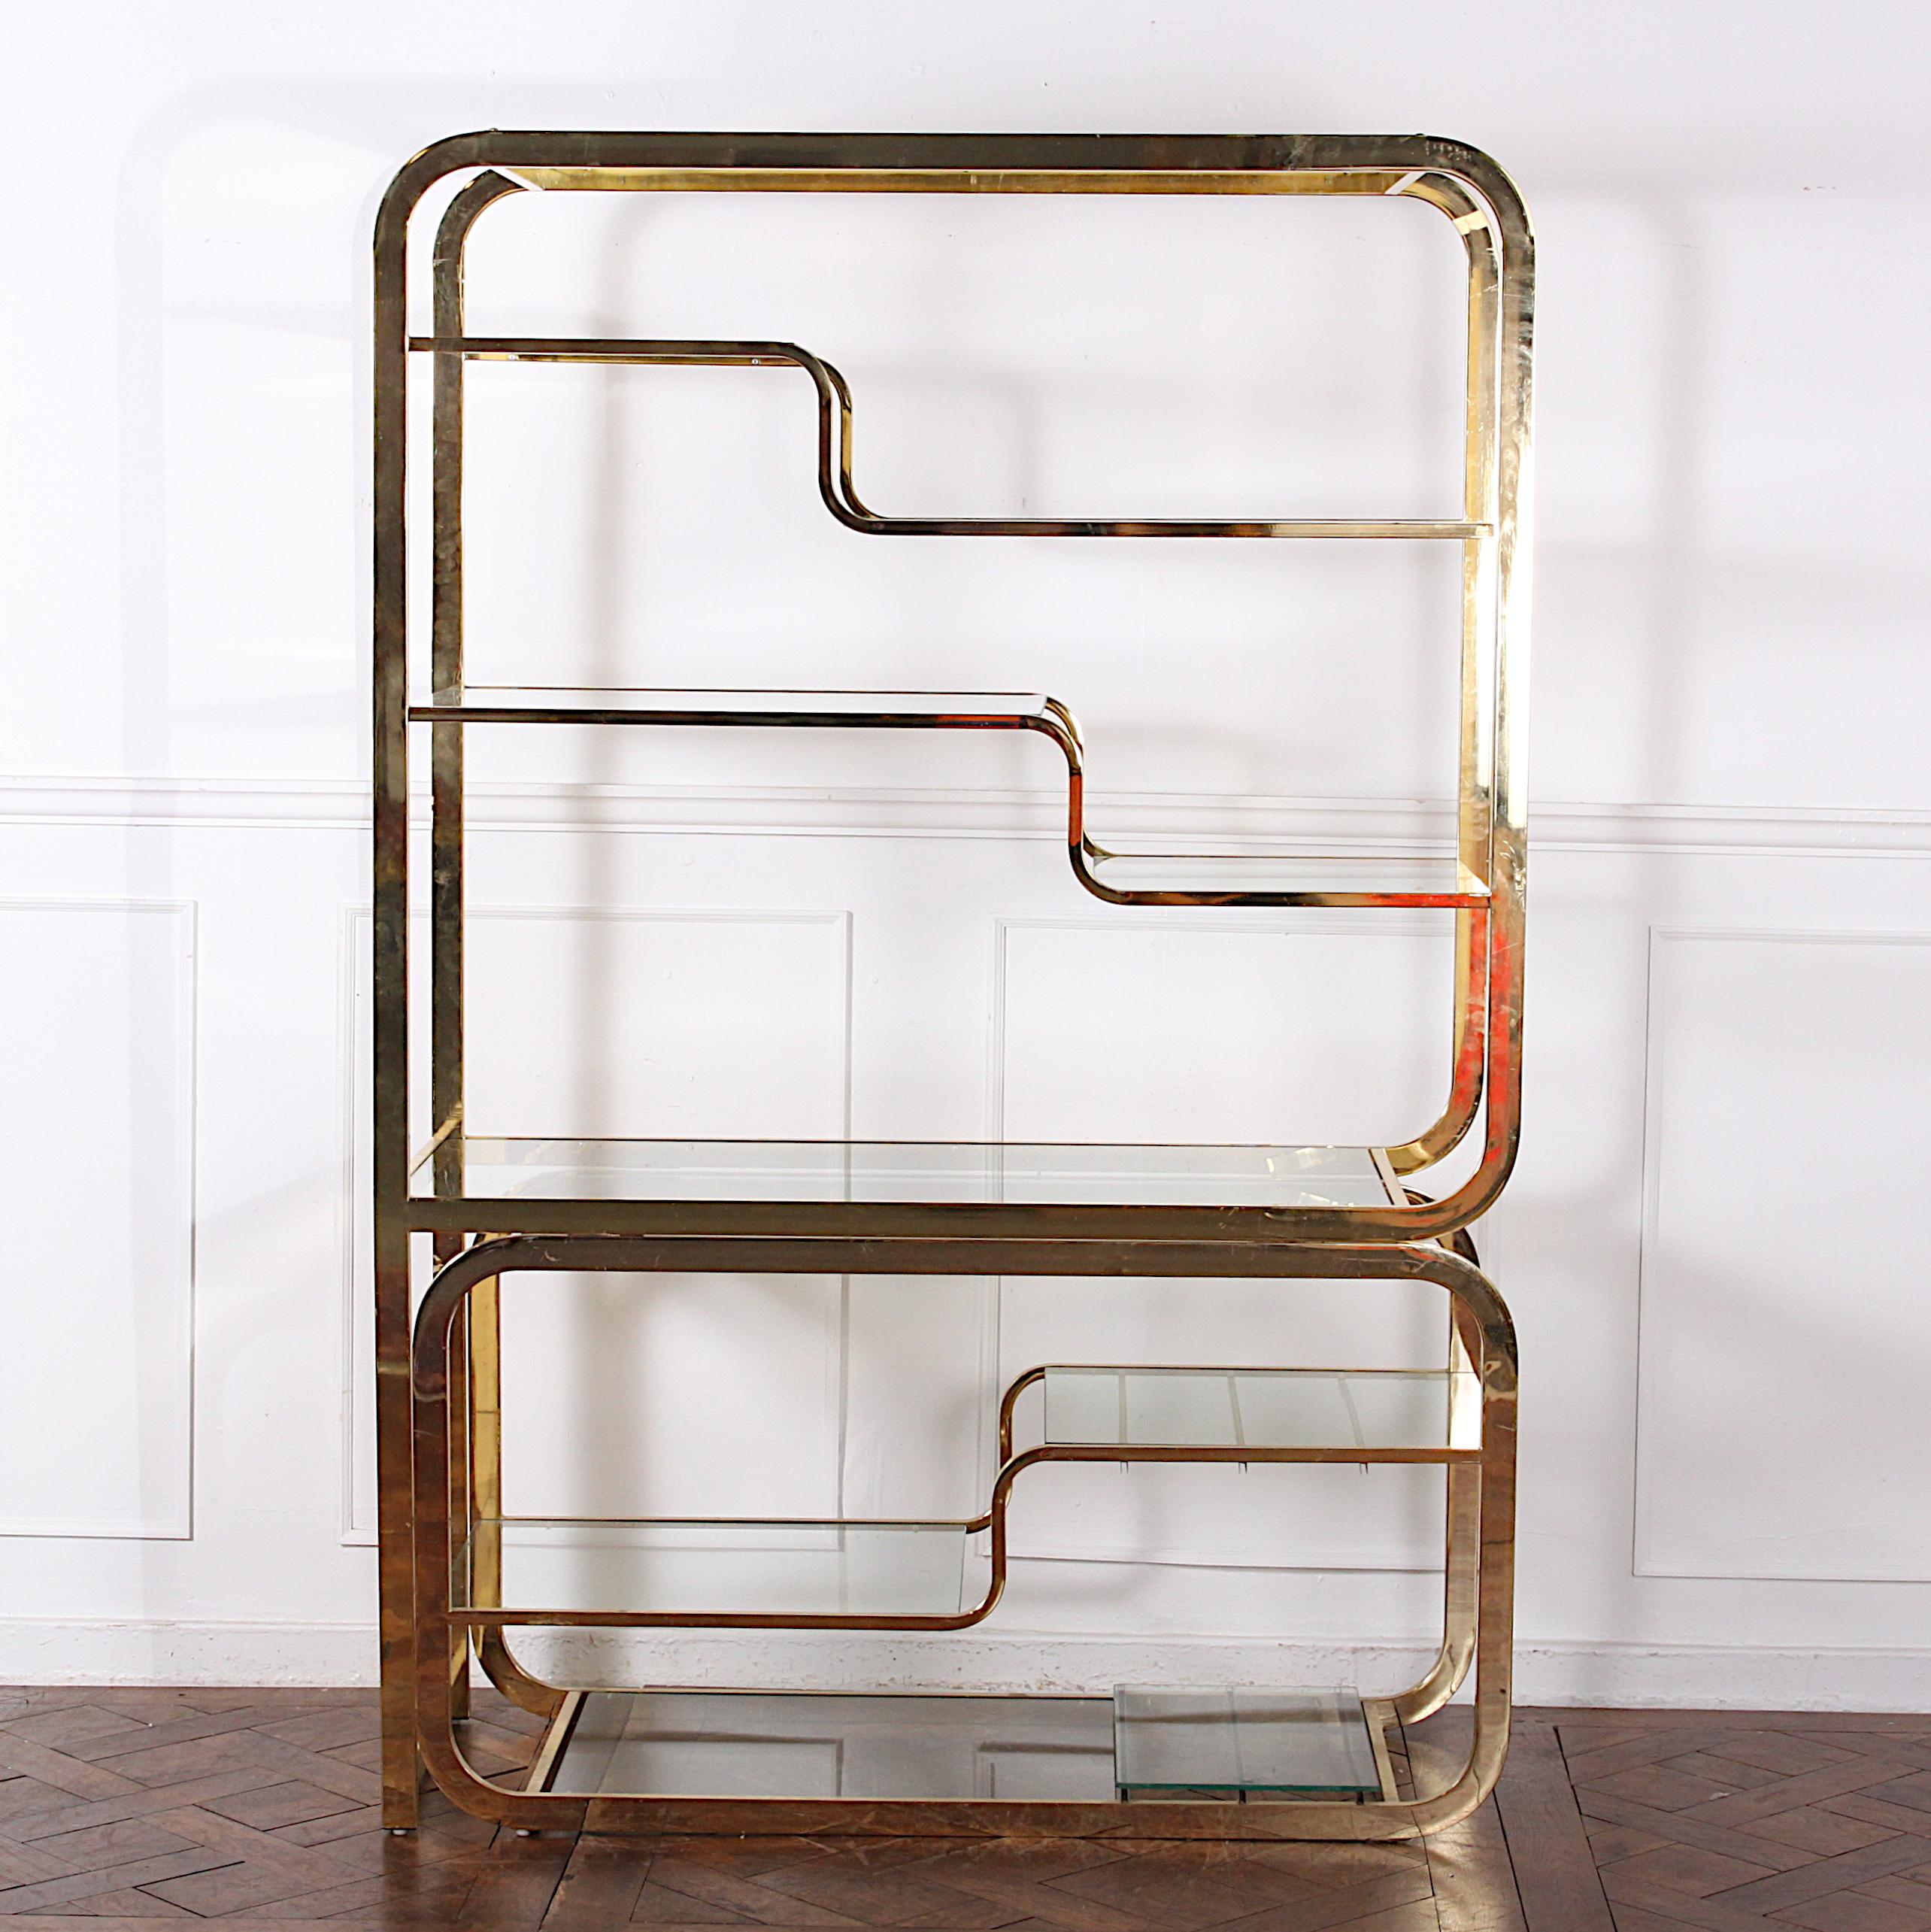 Brass and glass adjustable etagere, with a width of between 48? and 80?.
Impressive Mid-Century Modern brass and glass etagere with great modular design attributed to Milo Baughman. This etagere features a innovative cantilever base that can moved